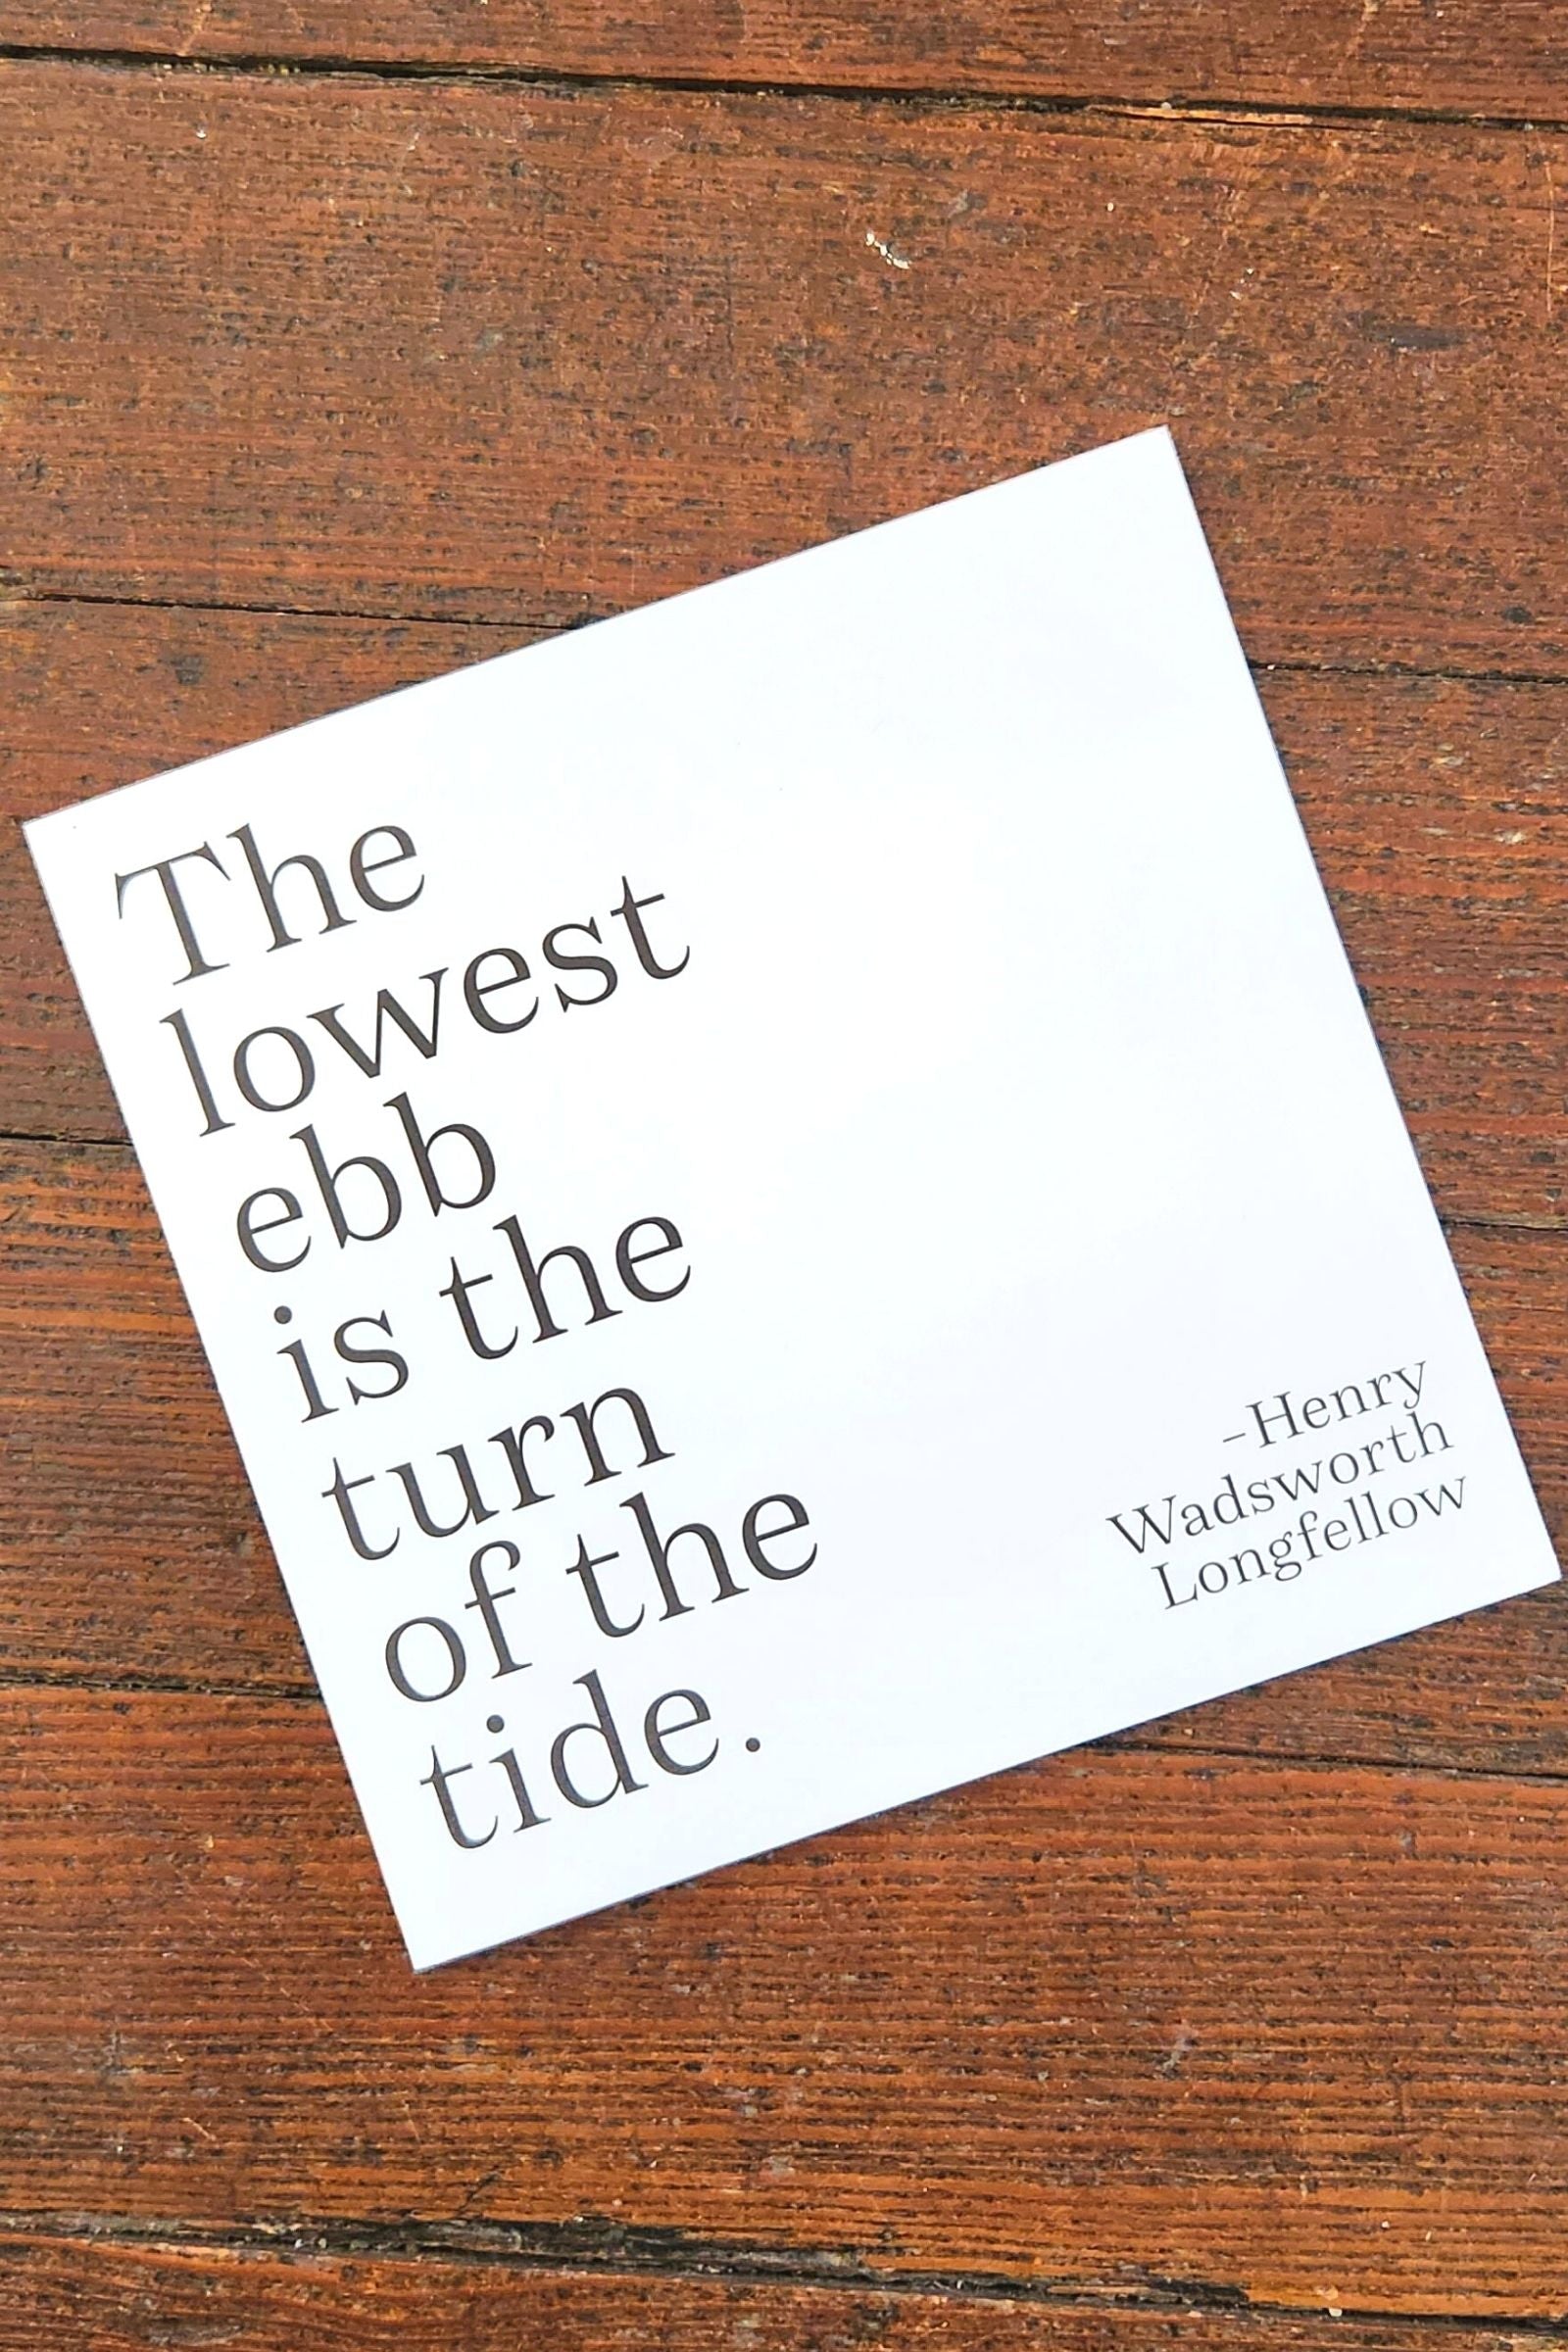 The Lowest Ebb Inspirational Card